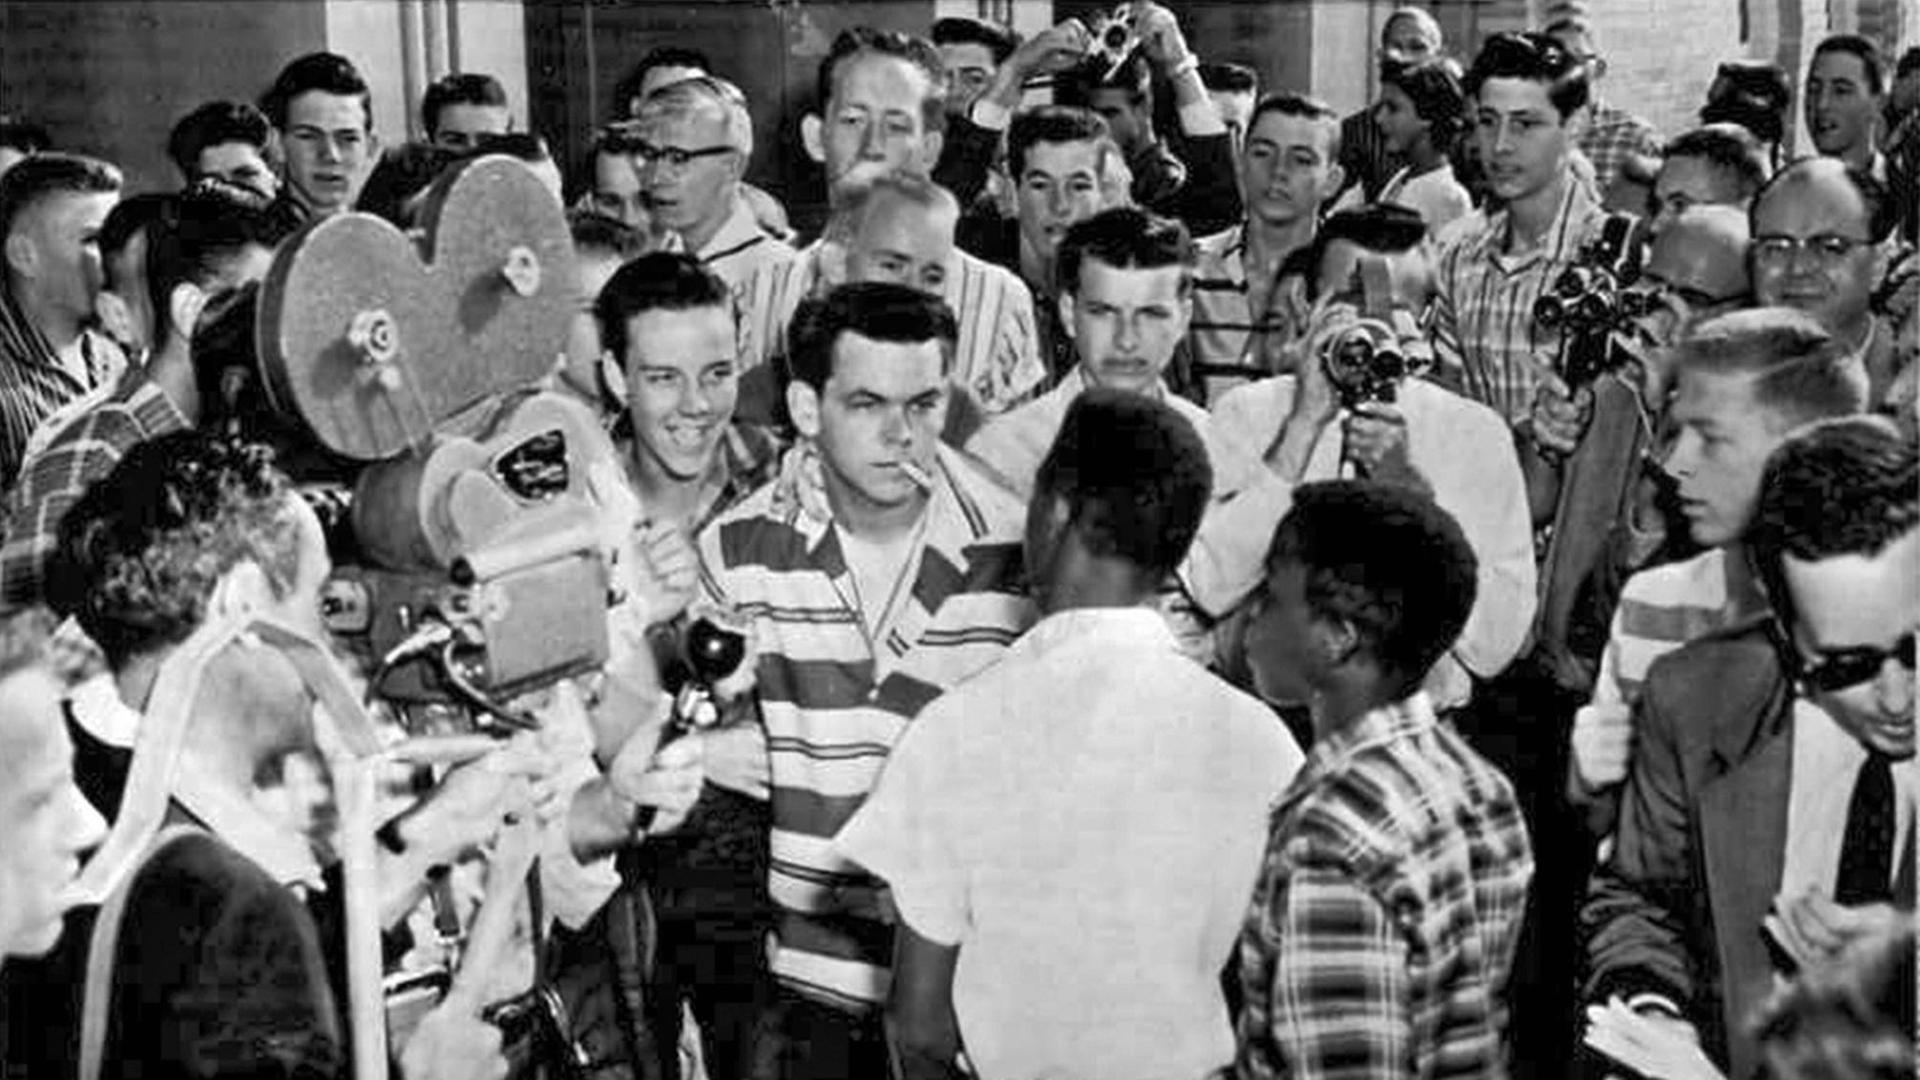 Little Rock, Arkansas: September 9, 1957. Students at the North Little Rock HIgh School blocked the doors of the school to prevent six Negro students who had been enrolled earlier at the school from entering. The picture shows a white student daring a Negro to try and enter. Just after this picture was taken, the Negroes were shoved down a flight of stairs and out to the sidewalk. PUBLICATIONxINxGERxSUIxAUTxHUNxONLY 990_16_7-HIst-CR_1HR Little Rock Arkansas September 9 1957 Students AT The North Little Rock High School blocked The Doors of The School to Prevent Six Negro Students Who had been earlier AT The School from ENTERING The Picture Shows a White Student Daring a Negro to Try and Enter Just After This Picture what Taken The Were Down a Flight of Stairs and out to The Sidewalk PUBLICATIONxINxGERxSUIxAUTxHUNxONLY 990_16_7 CR_1HR